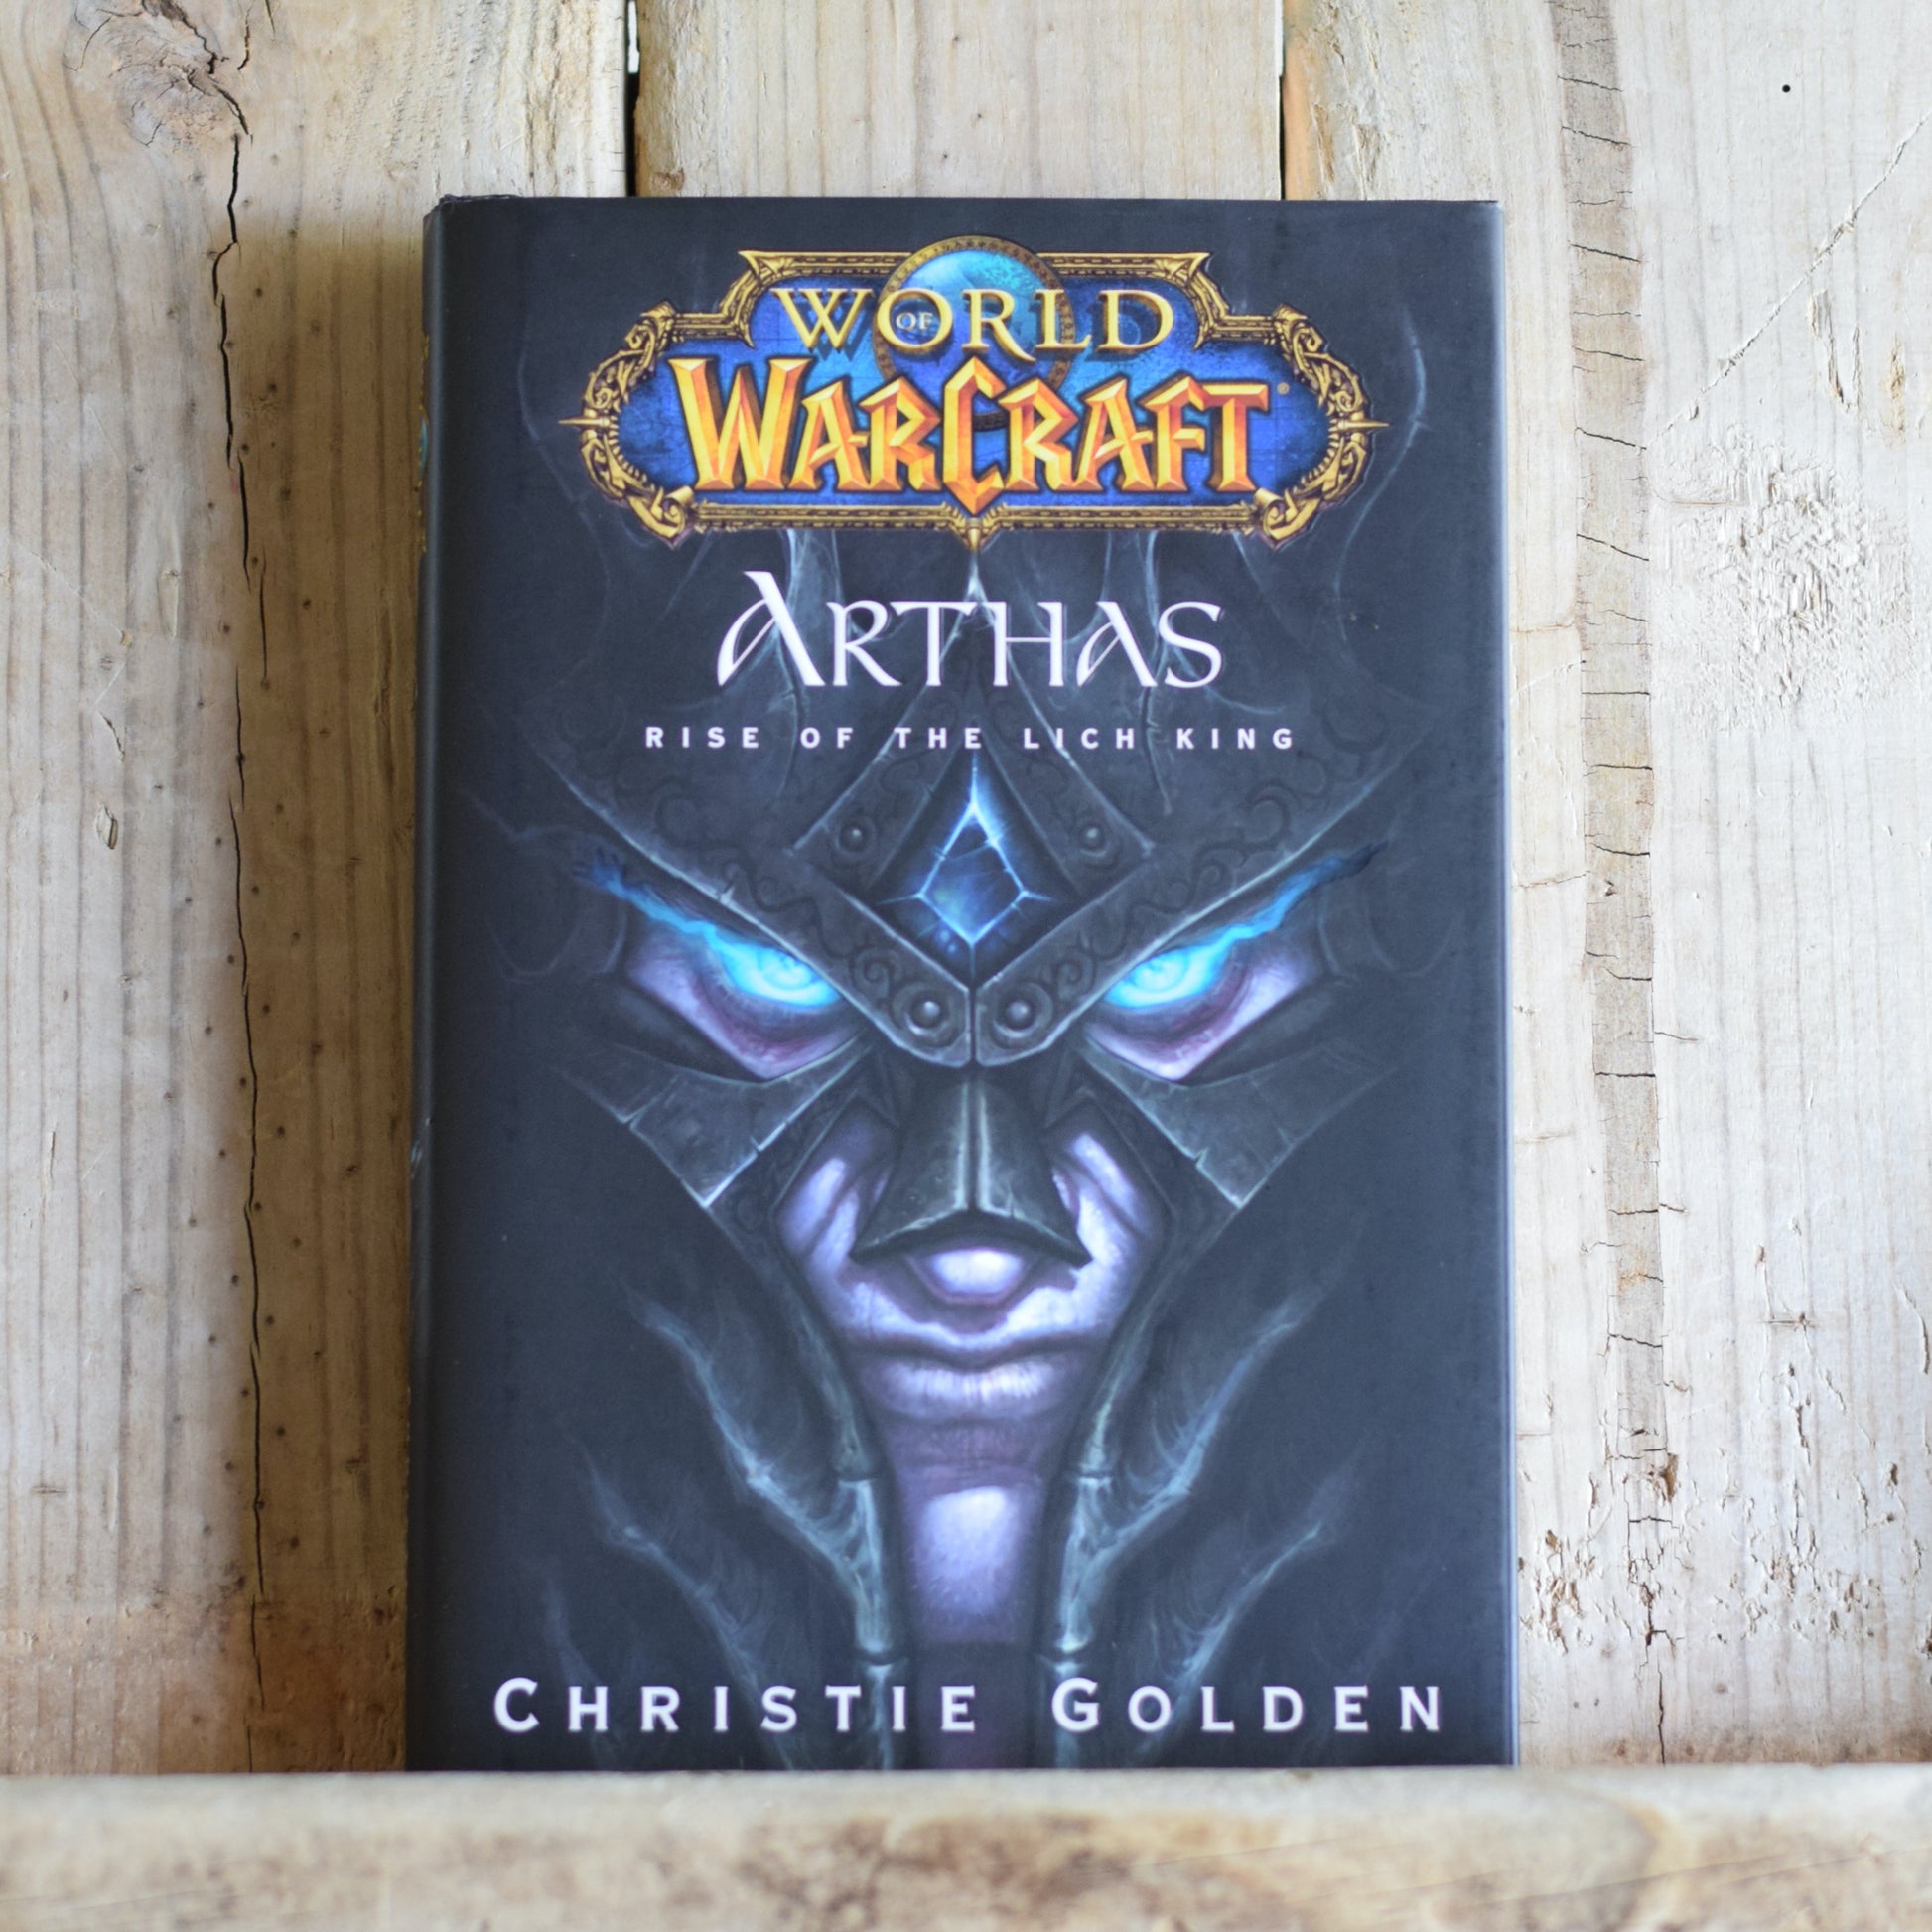 World of Warcraft: Arthas: Rise of the Lich King: Golden, Christie:  9781439157602: : Books